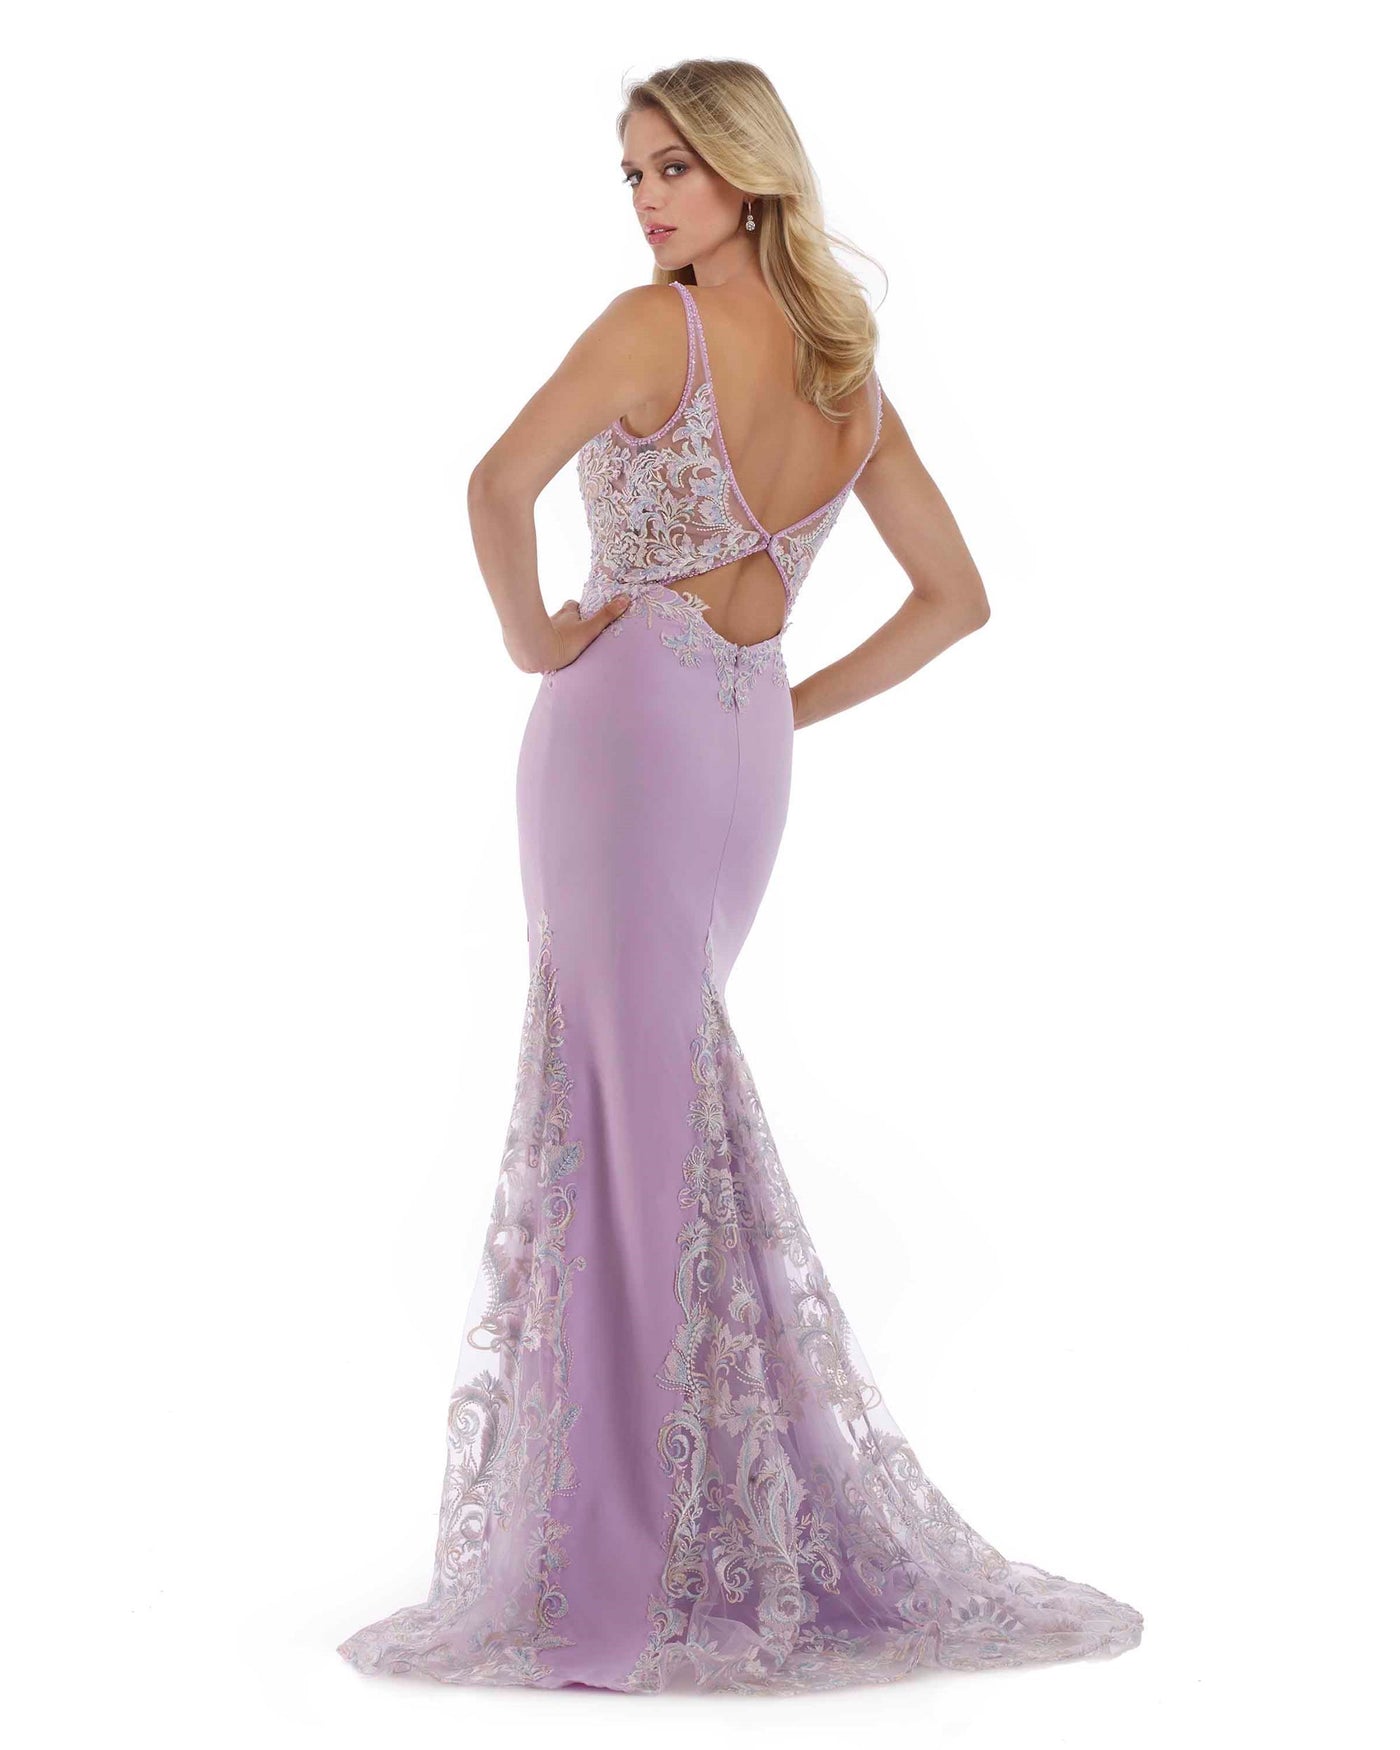 Morrell Maxie - 16098 Embroidered Deep V-neck Mermaid Dress in Purple